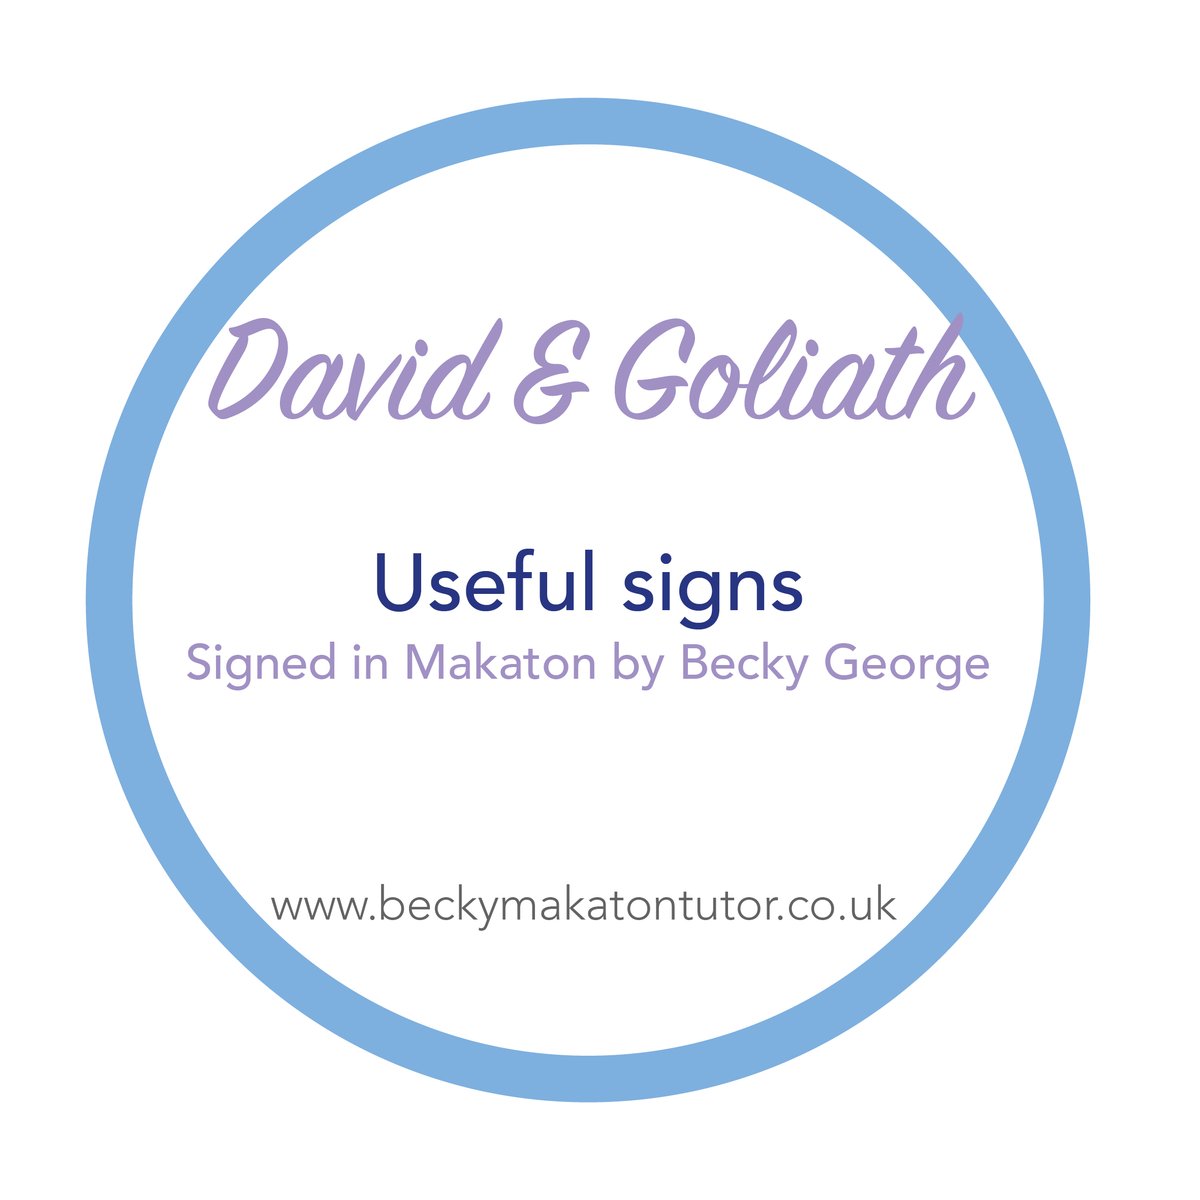 Makaton signs for the bible story David & Goliath can be found here.

I hope it's helpful
youtu.be/x2qrP7ZmwBM

#makaton #biblestory #davidandgoliath #giant #church